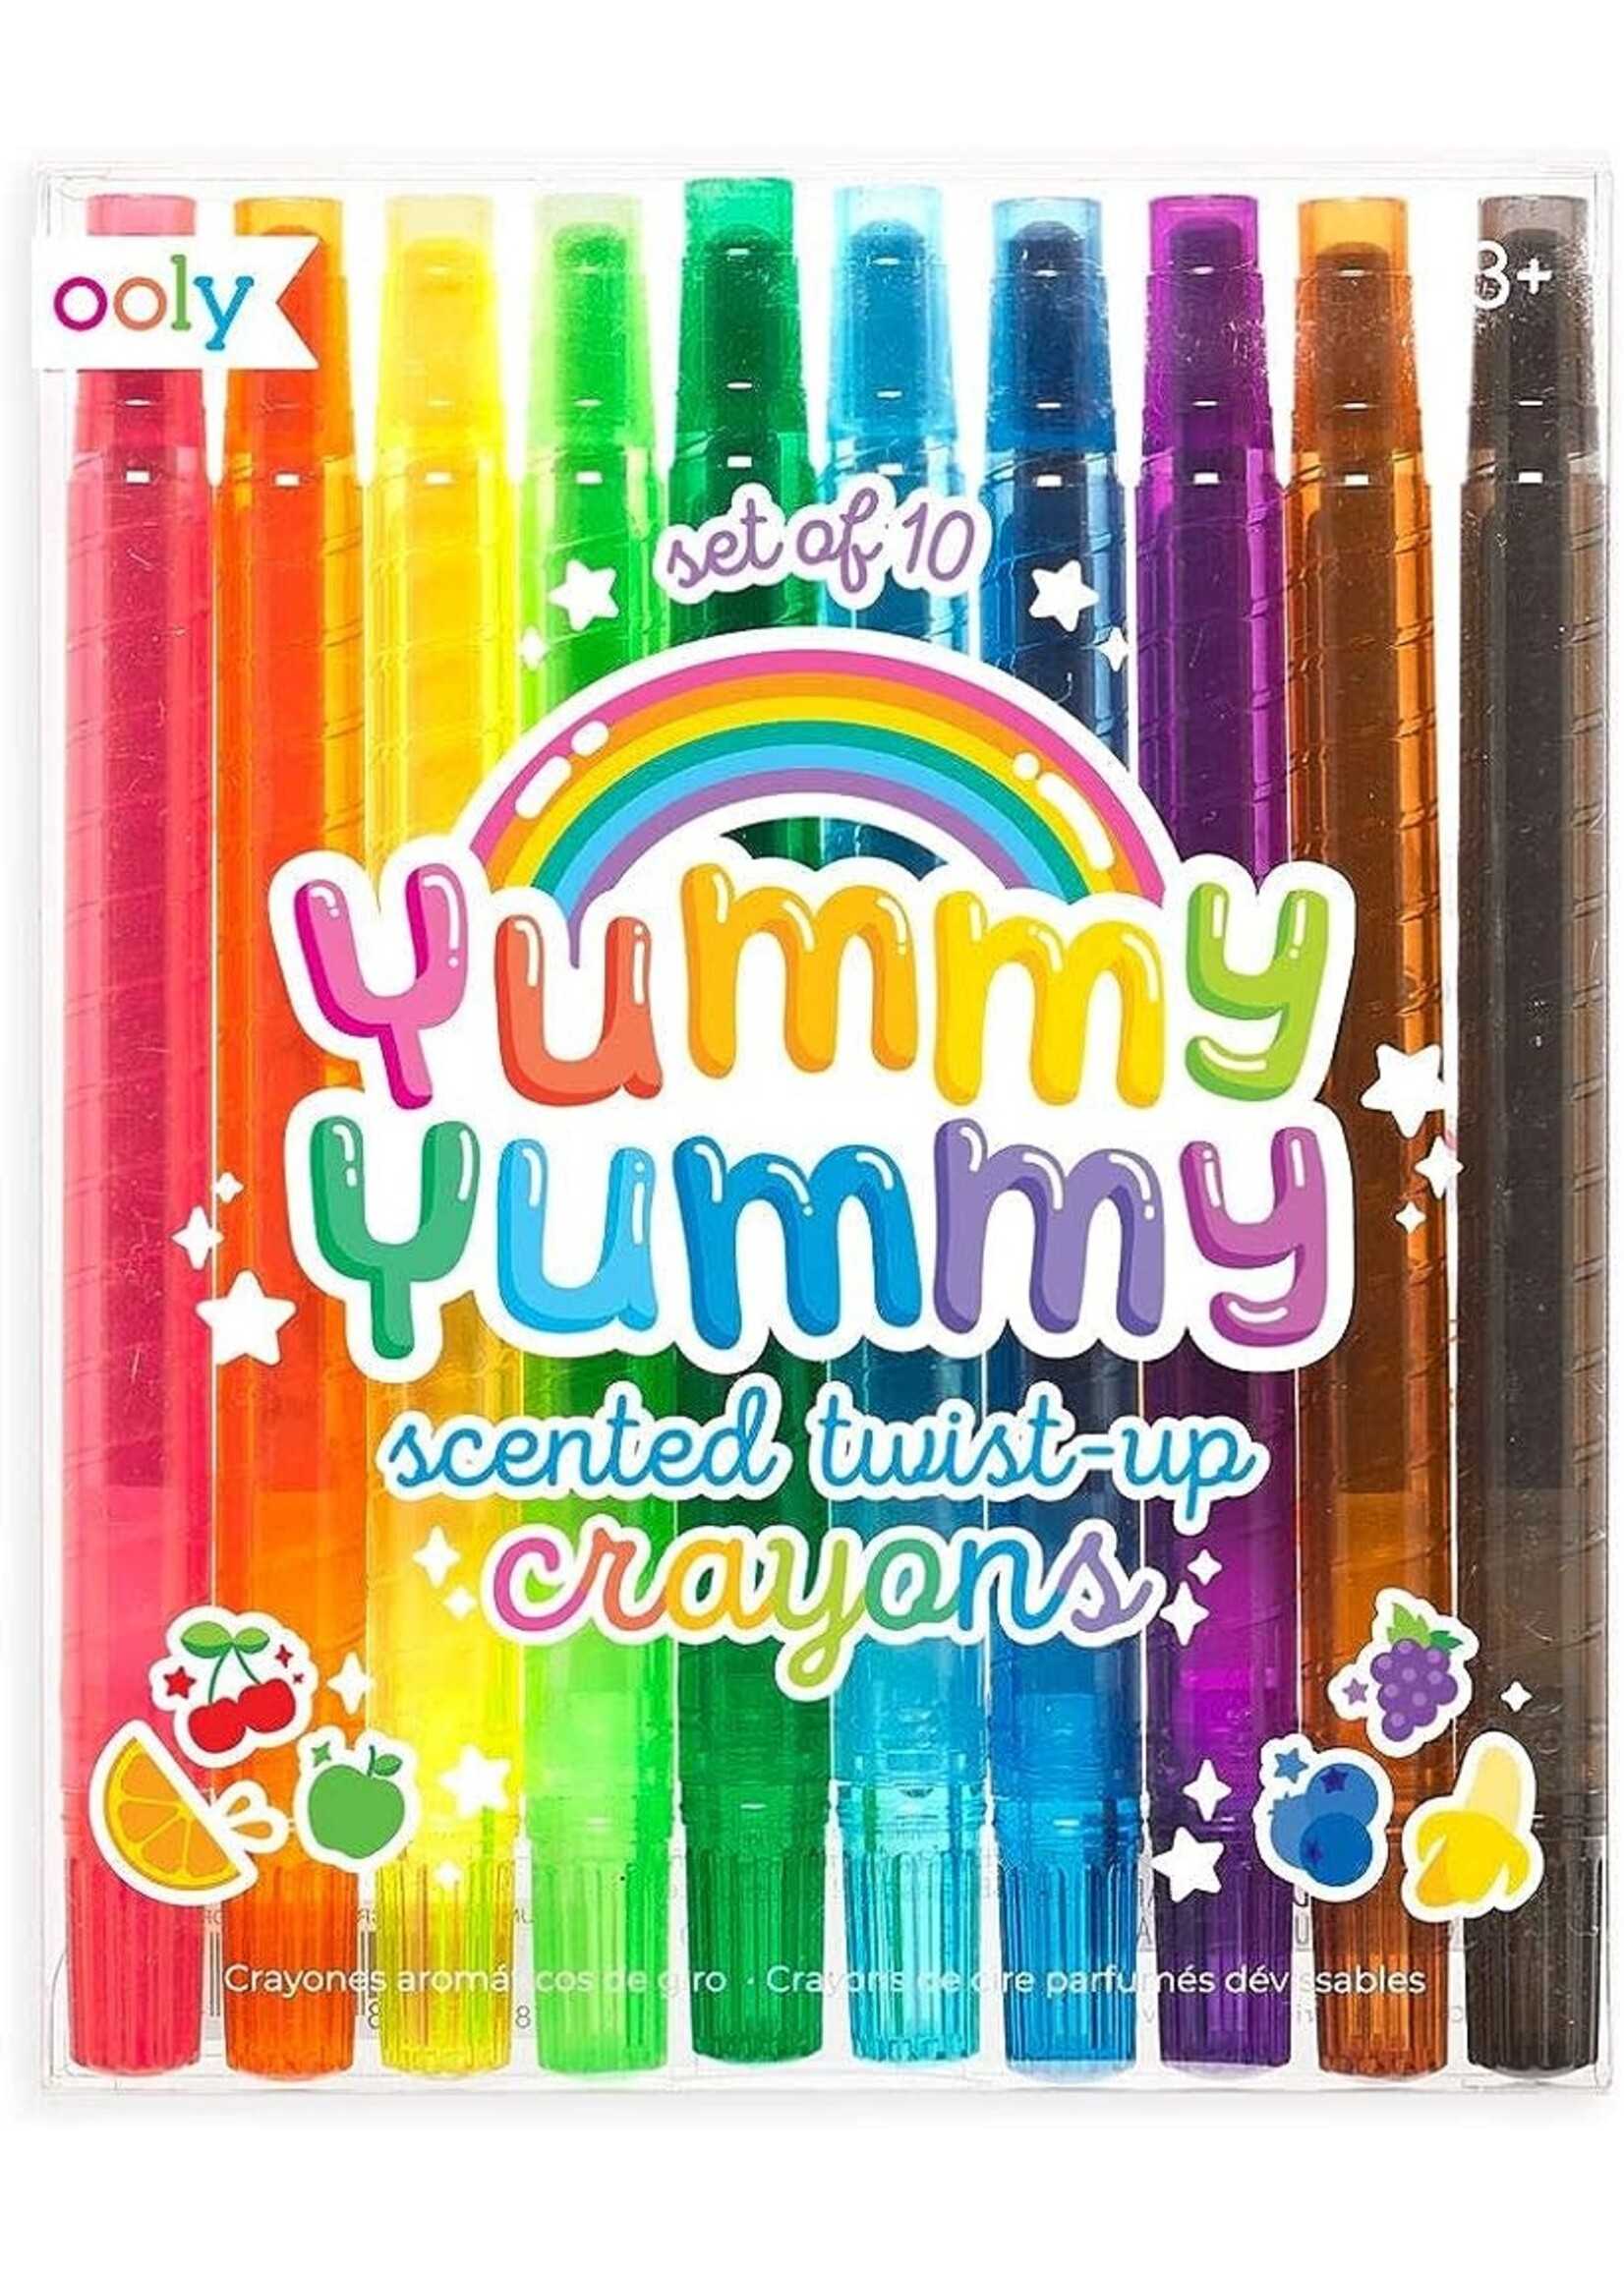 Ooly Ooly Yummy Yummy Scented Twist Up Crayons 10pk